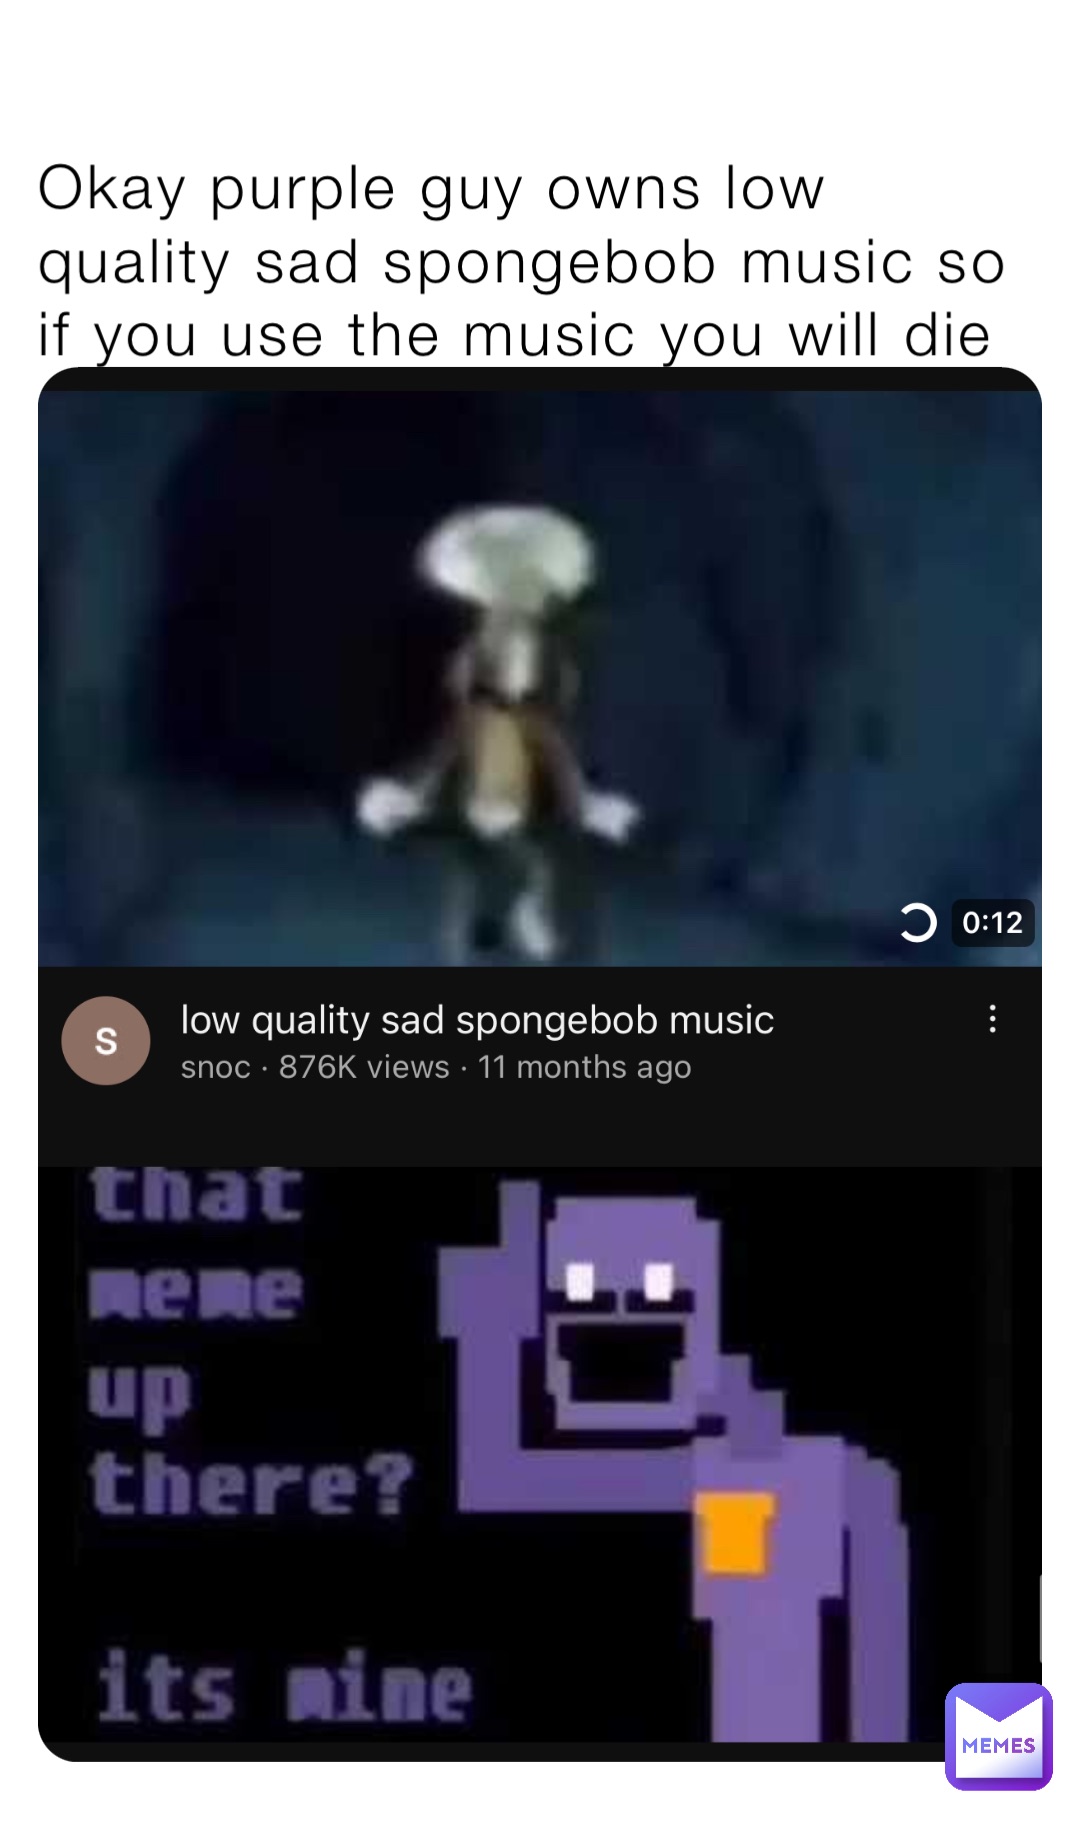 Okay purple guy owns low quality sad spongebob music so if you use the music you will die